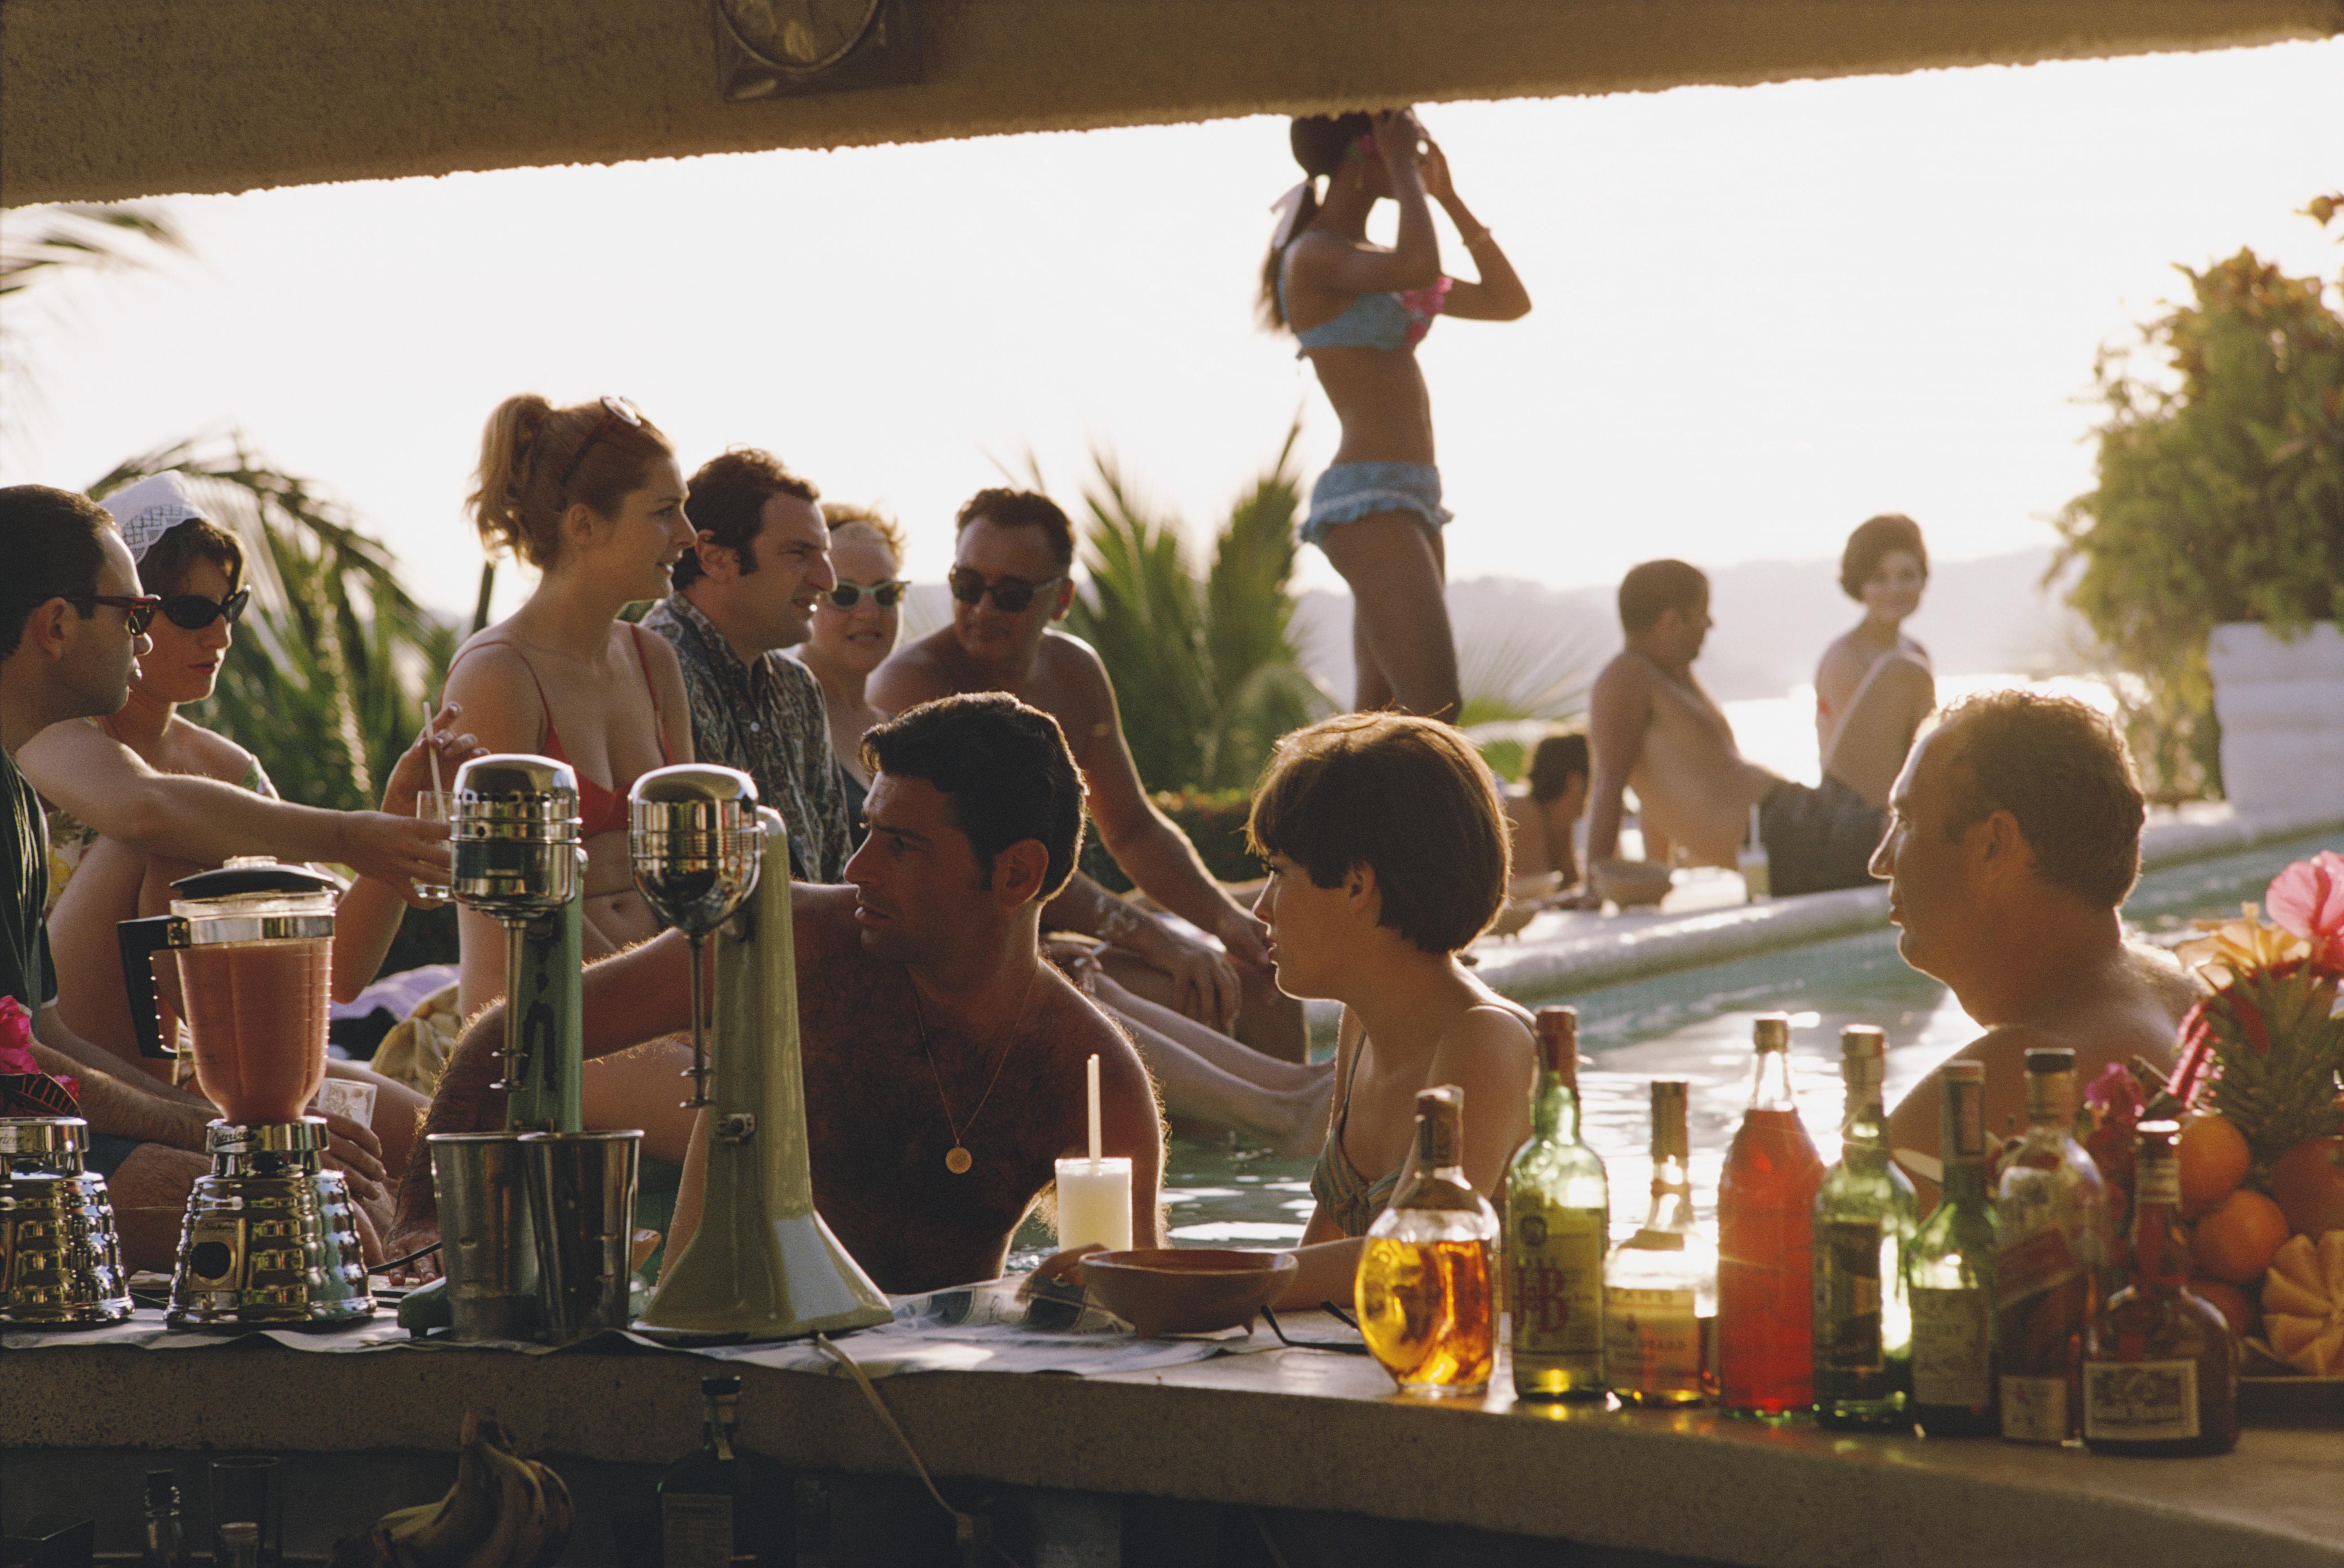 'Vila Vera' 1968 Slim Aarons Limited Estate Edition

The bar at the Villa Vera Hotel Spa and Racquet Club in Acapulco, January 1968. 

Produced from the original transparency
Certificate of authenticity supplied 
30x40 inches / 76 x 102 cm paper